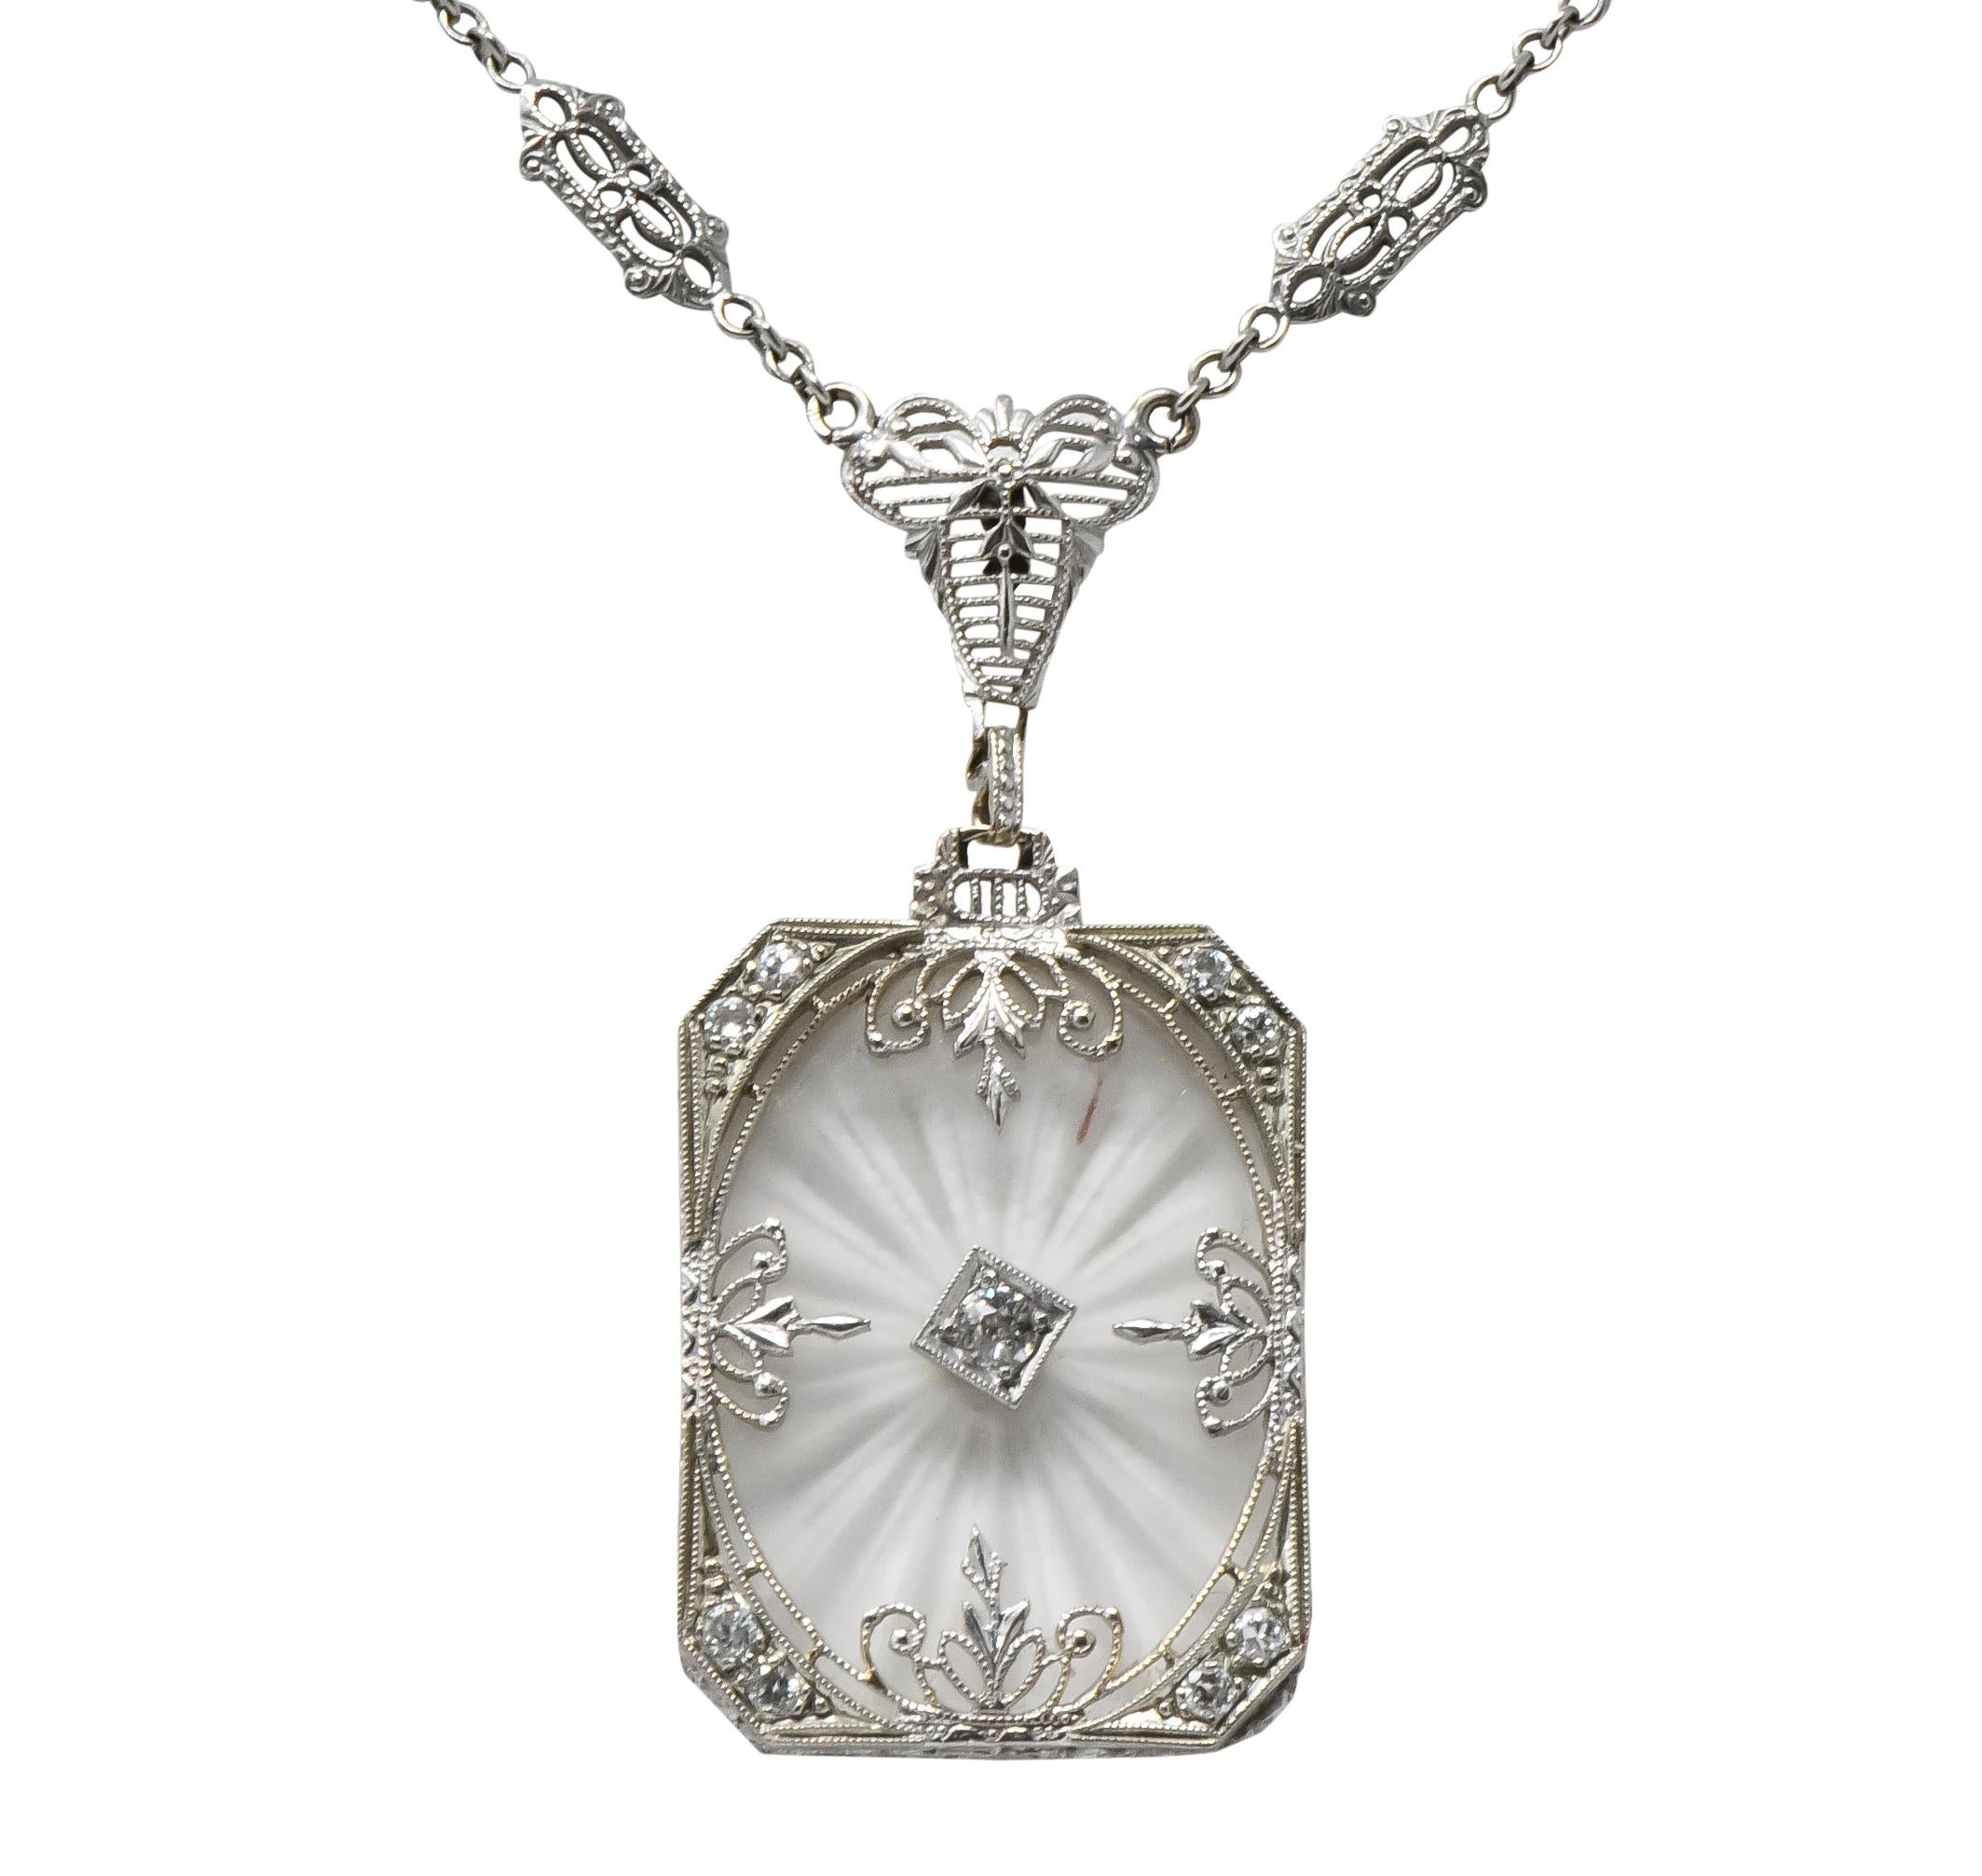 Centering rectangular camphor glass with inset round brilliant cut diamond, set in a millegrain white gold frame

Accented by round brilliant and single cut diamonds, total diamond weight approximately 0.22 carats, eye-clean and white

On an